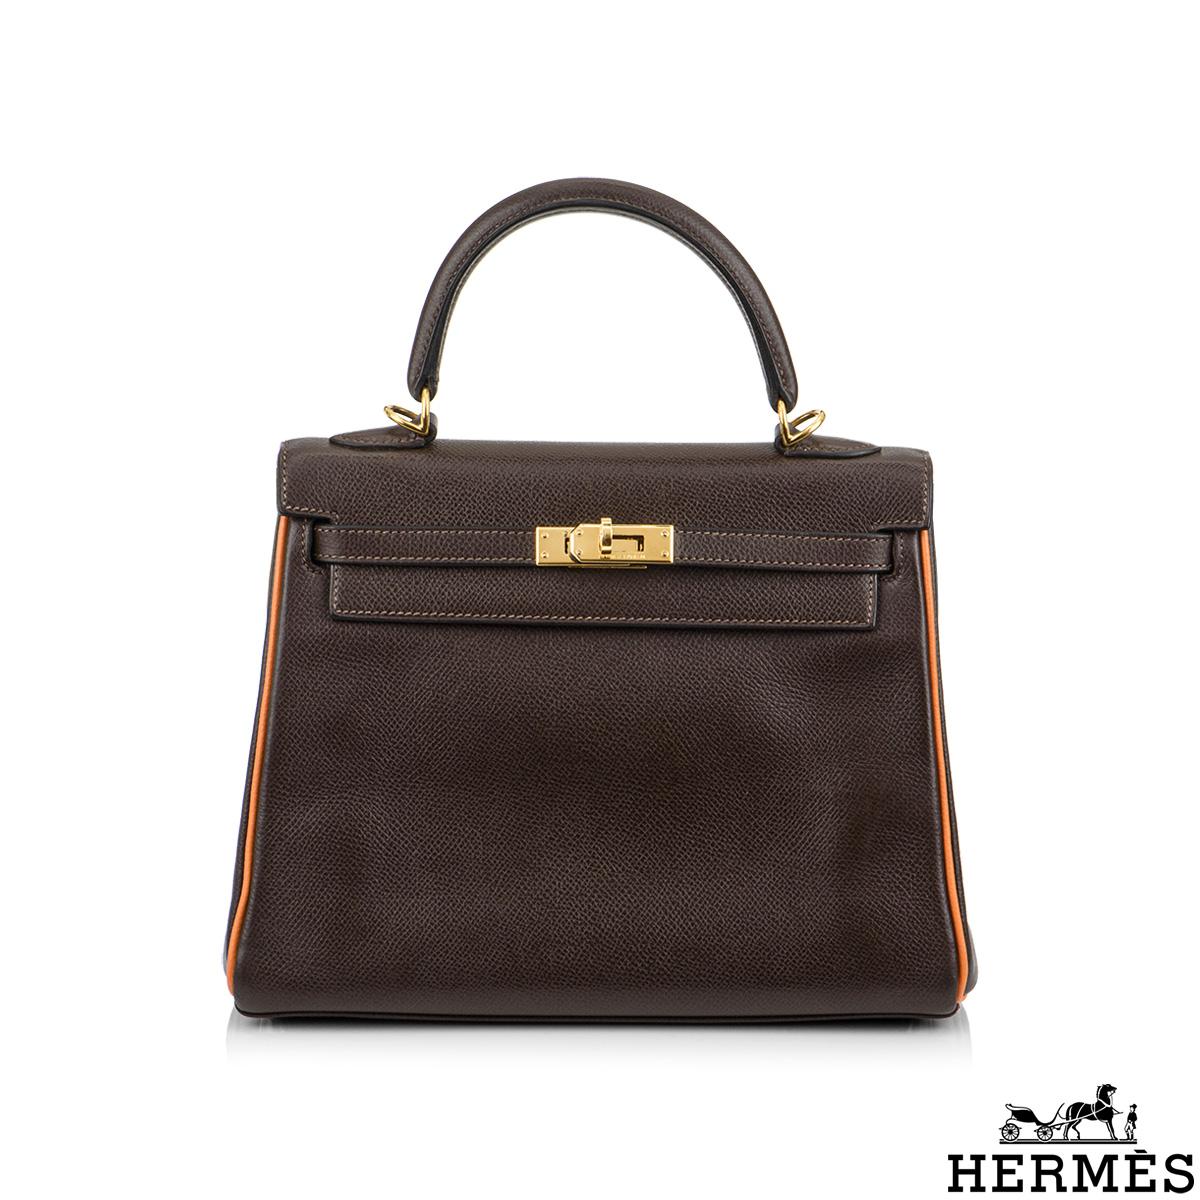 A beautiful vintage Hermès Kelly 25cm Bi colour Handbag. The chocolate brown colour is complimented with orange piping and gold hardware. The exterior of this Kelly features a retourne style in chocolate brown leather. It has a front toggle closure,